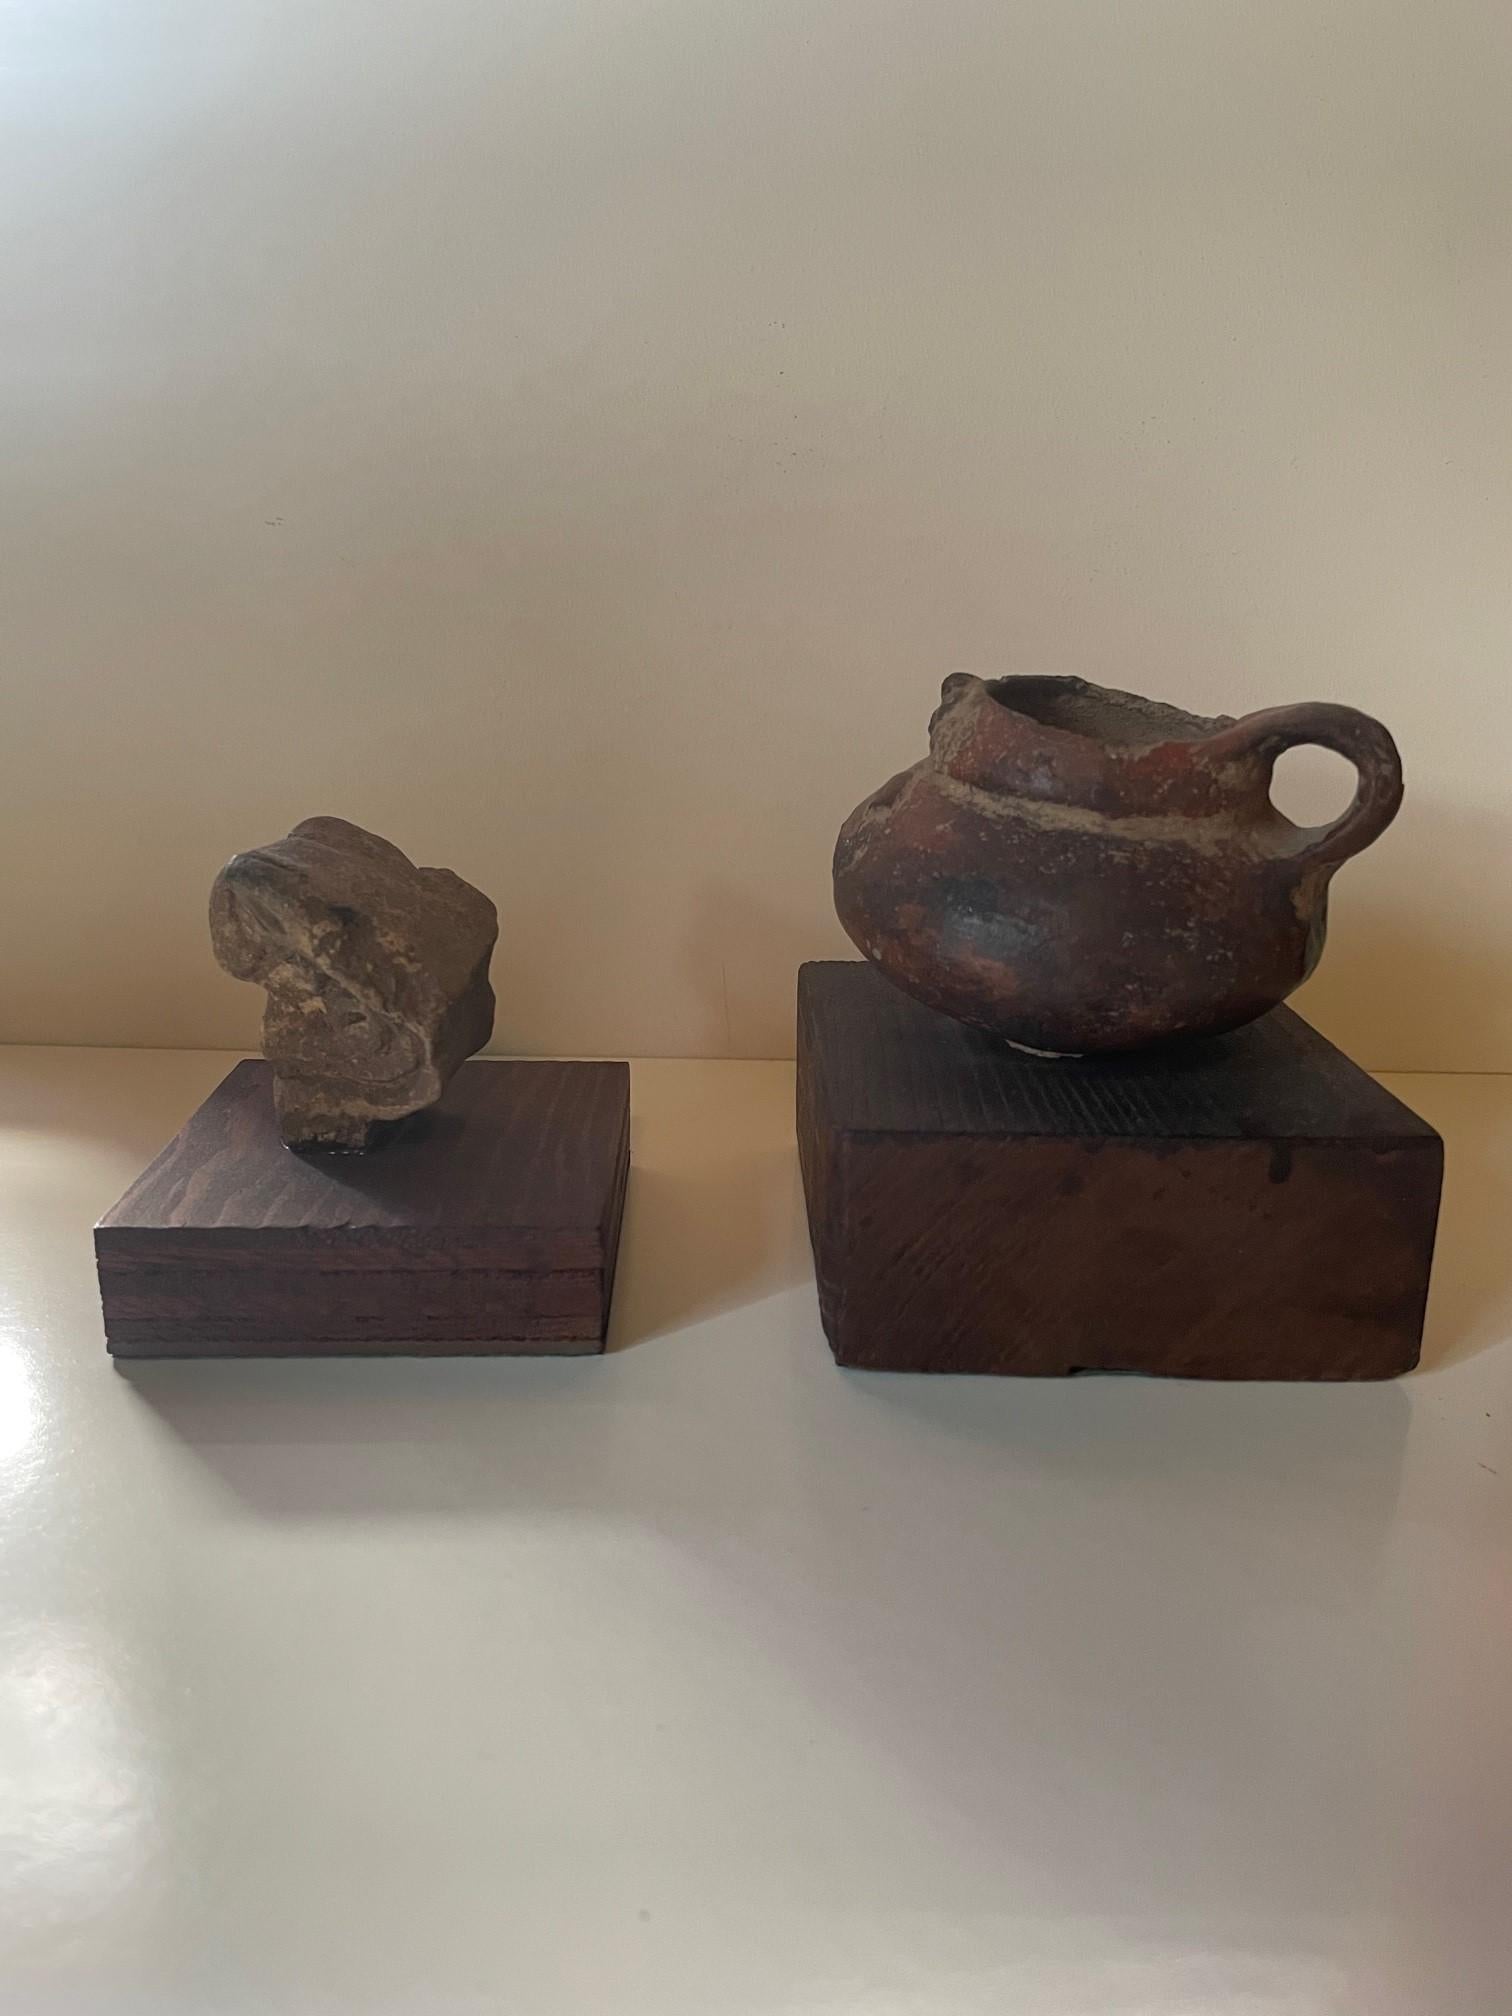 Beautiful set of two pre-Columbian bird form artifacts.

One finely carved bird head stone mounted on primitive wood base, in antique condition with no major breaks. Mounted with what appears to be a resin or epoxy to prevent any movement.

The